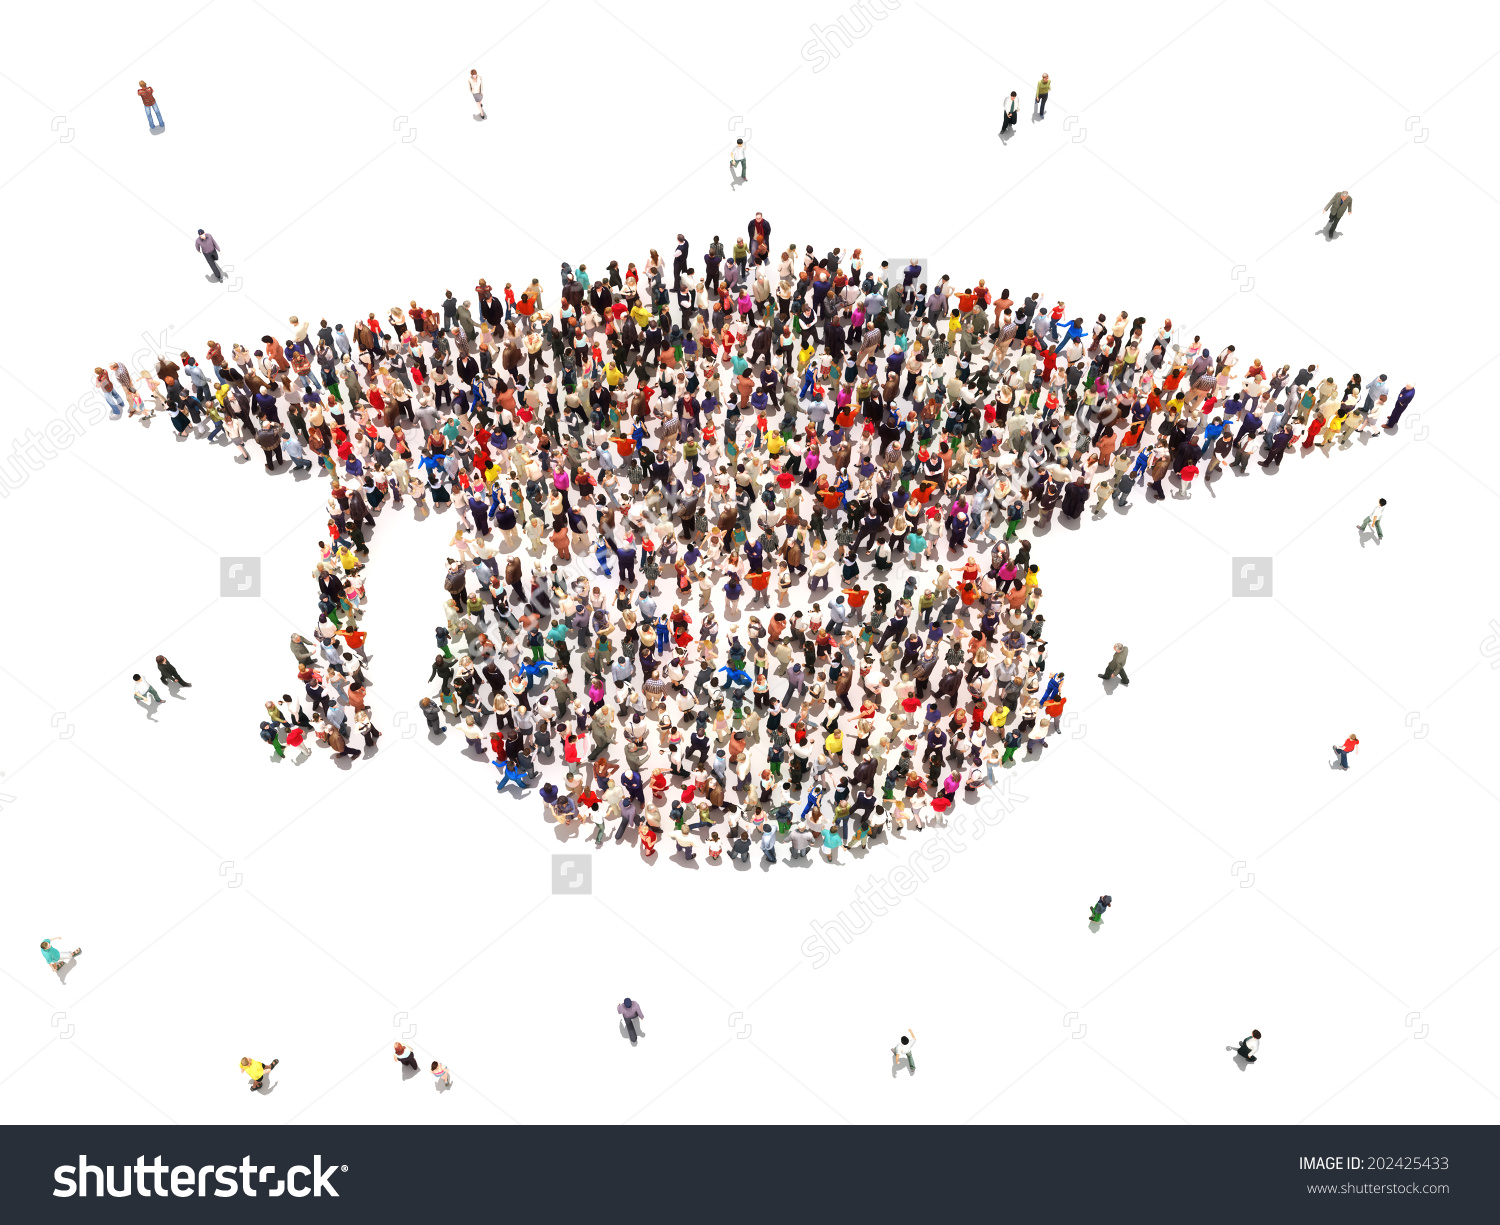 stock-photo-people-getting-an-education-large-group-of-people-in-the-shape-of-a-graduation-cap-on-a-white-202425433